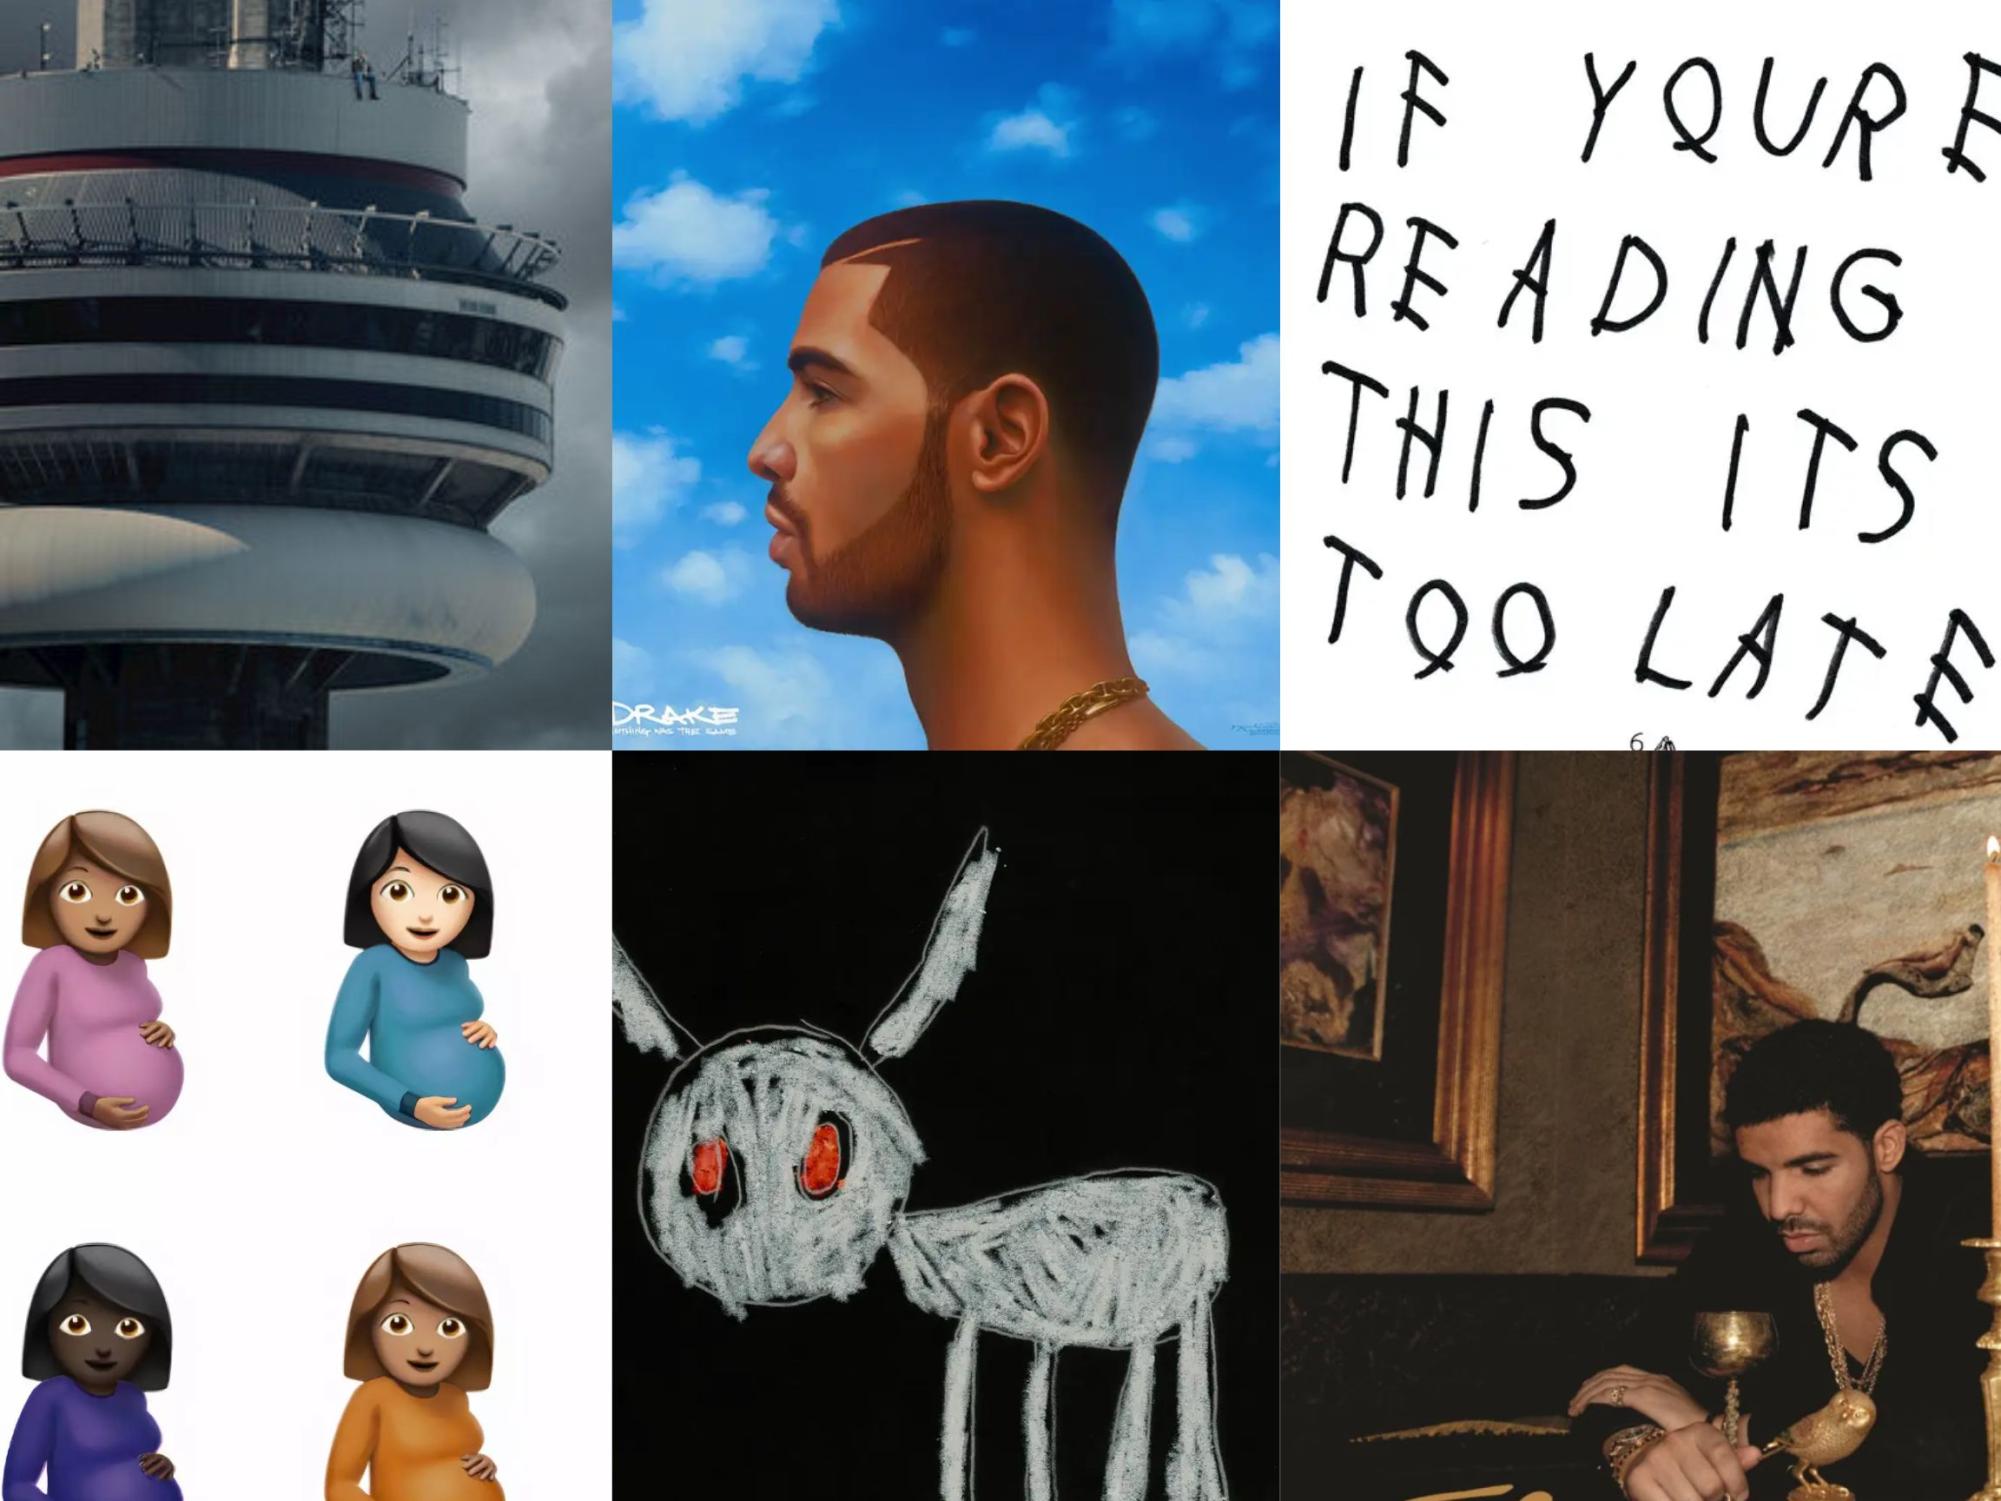 Six of Drakes studio albums whose sales have boosted the economy